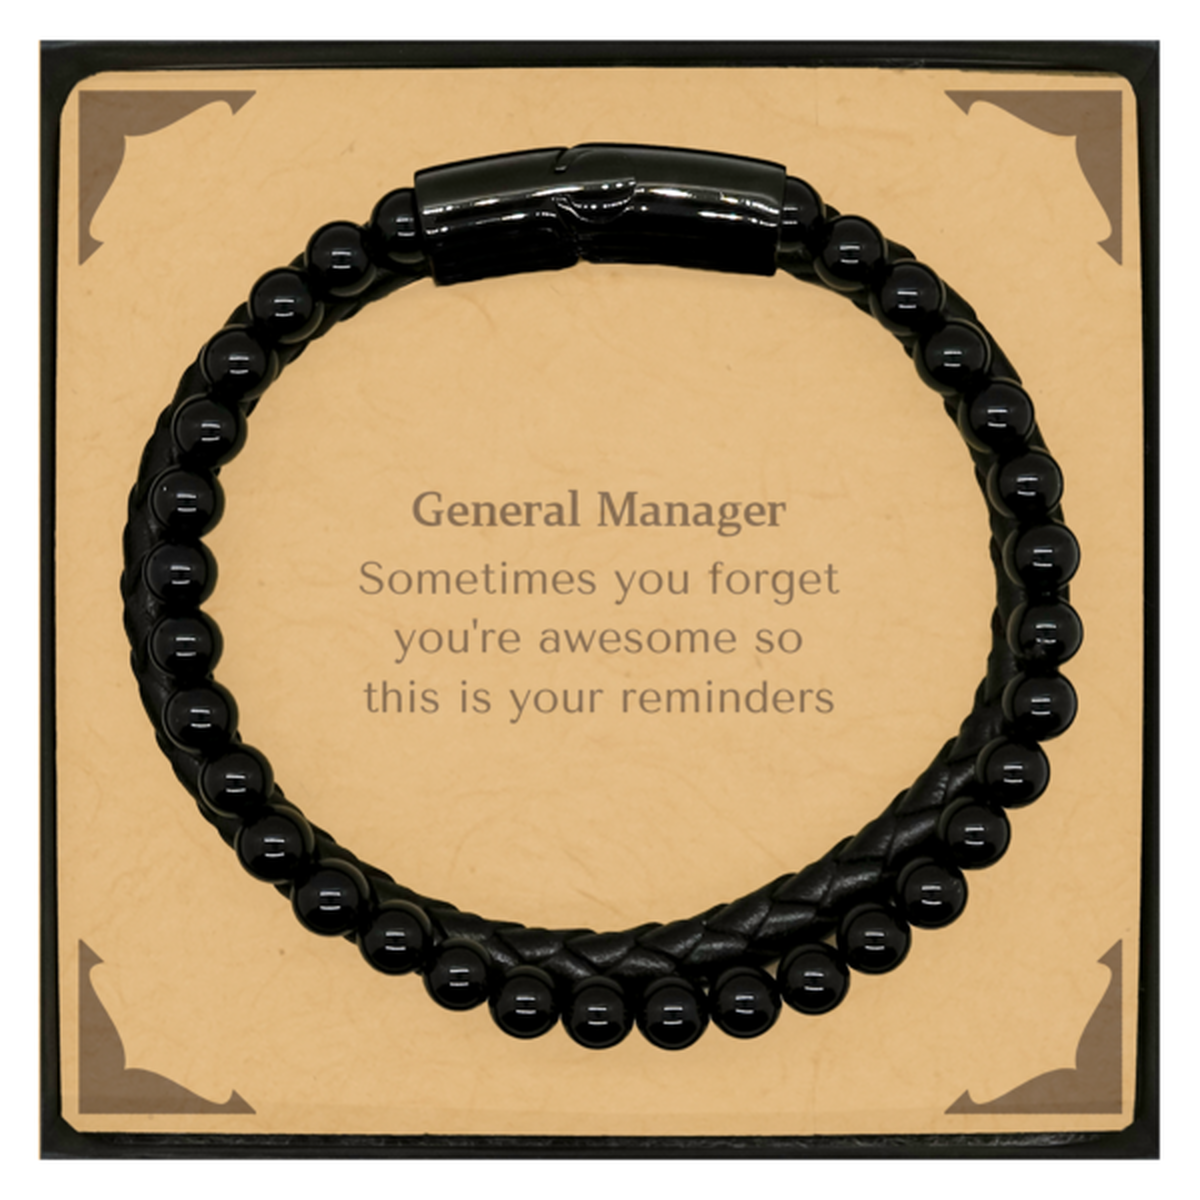 Sentimental General Manager Stone Leather Bracelets, General Manager Sometimes you forget you're awesome so this is your reminders, Graduation Christmas Birthday Gifts for General Manager, Men, Women, Coworkers